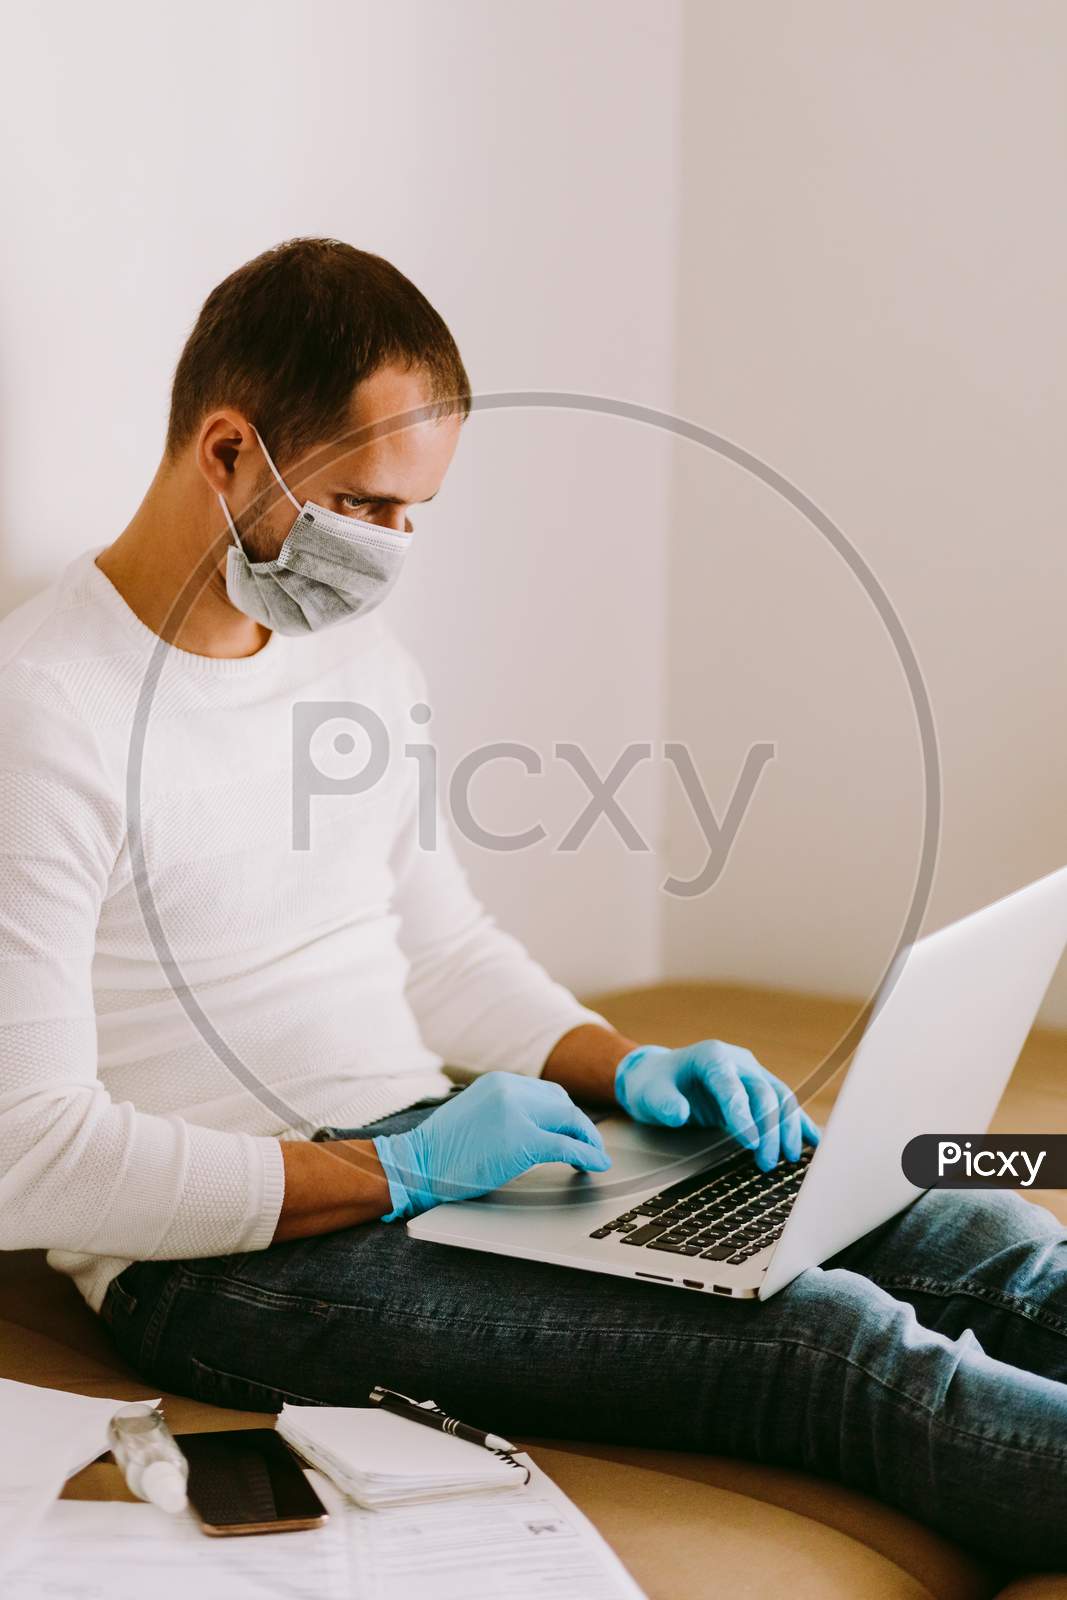 Man Working At Home Using Laptop And Smartphone During Quarantine